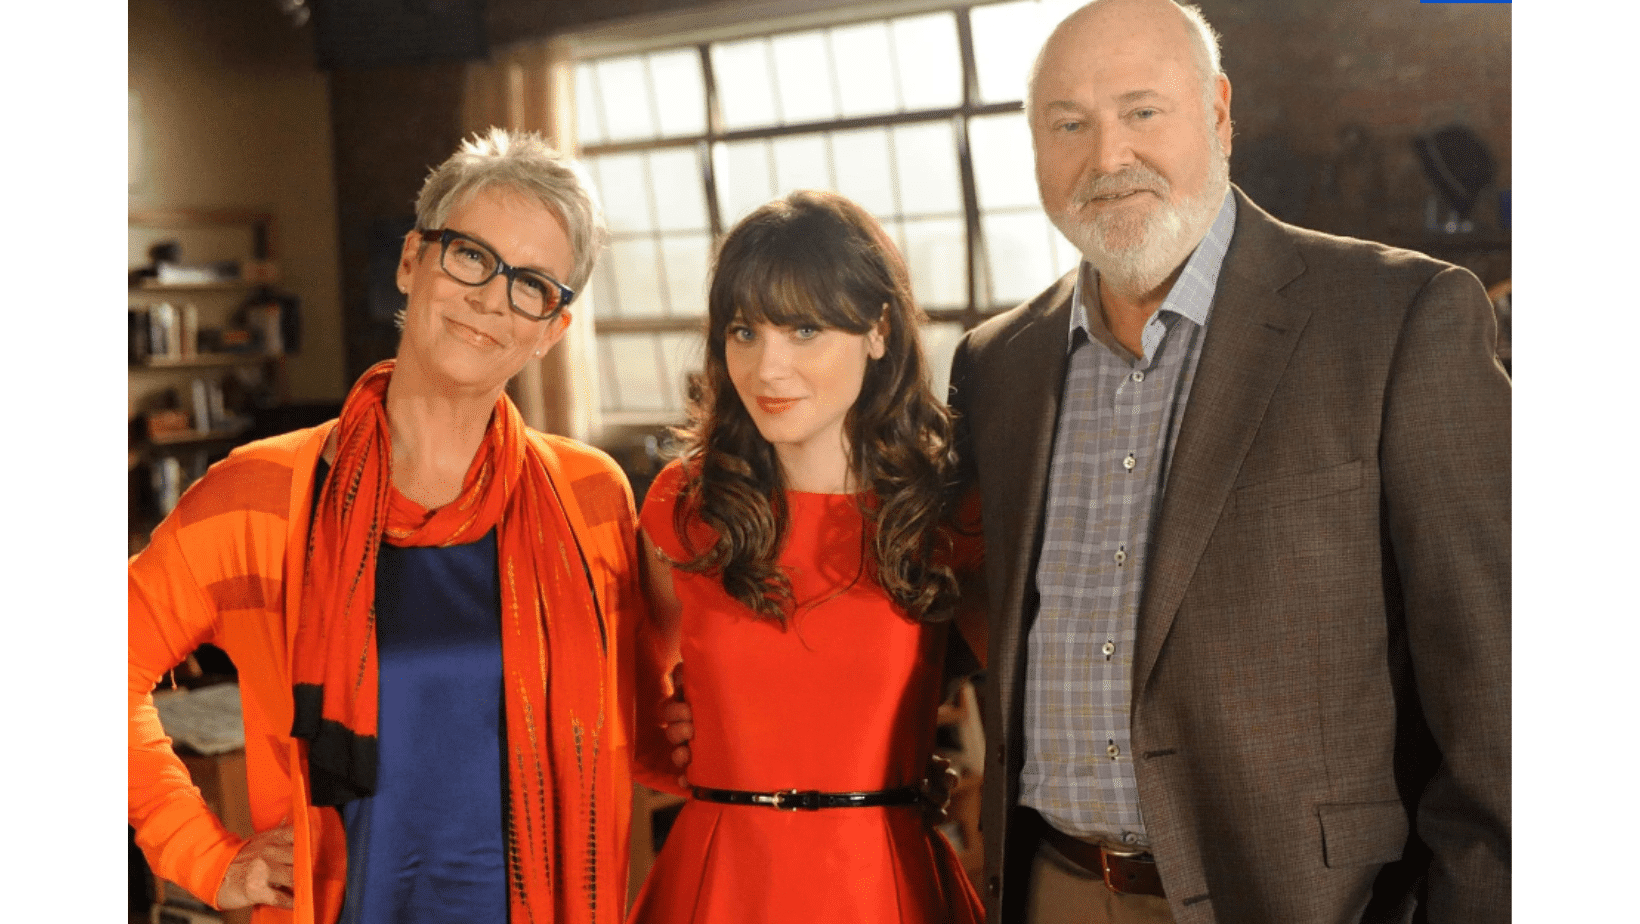 Jess and her parents during the Thanksgiving episode of New Girl.